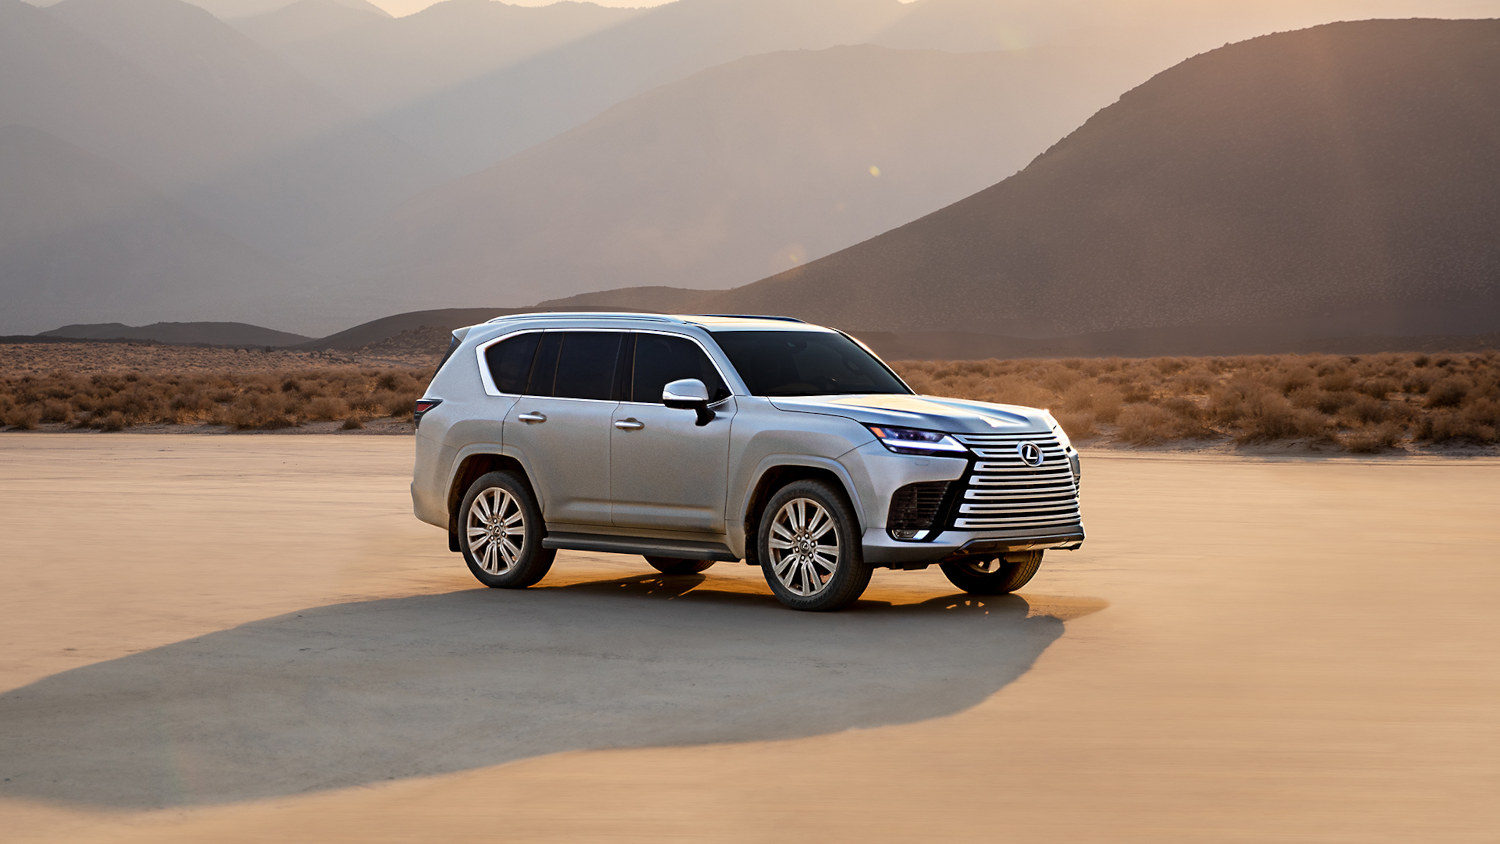 This 2023 Lexus LX is the best large luxury SUV